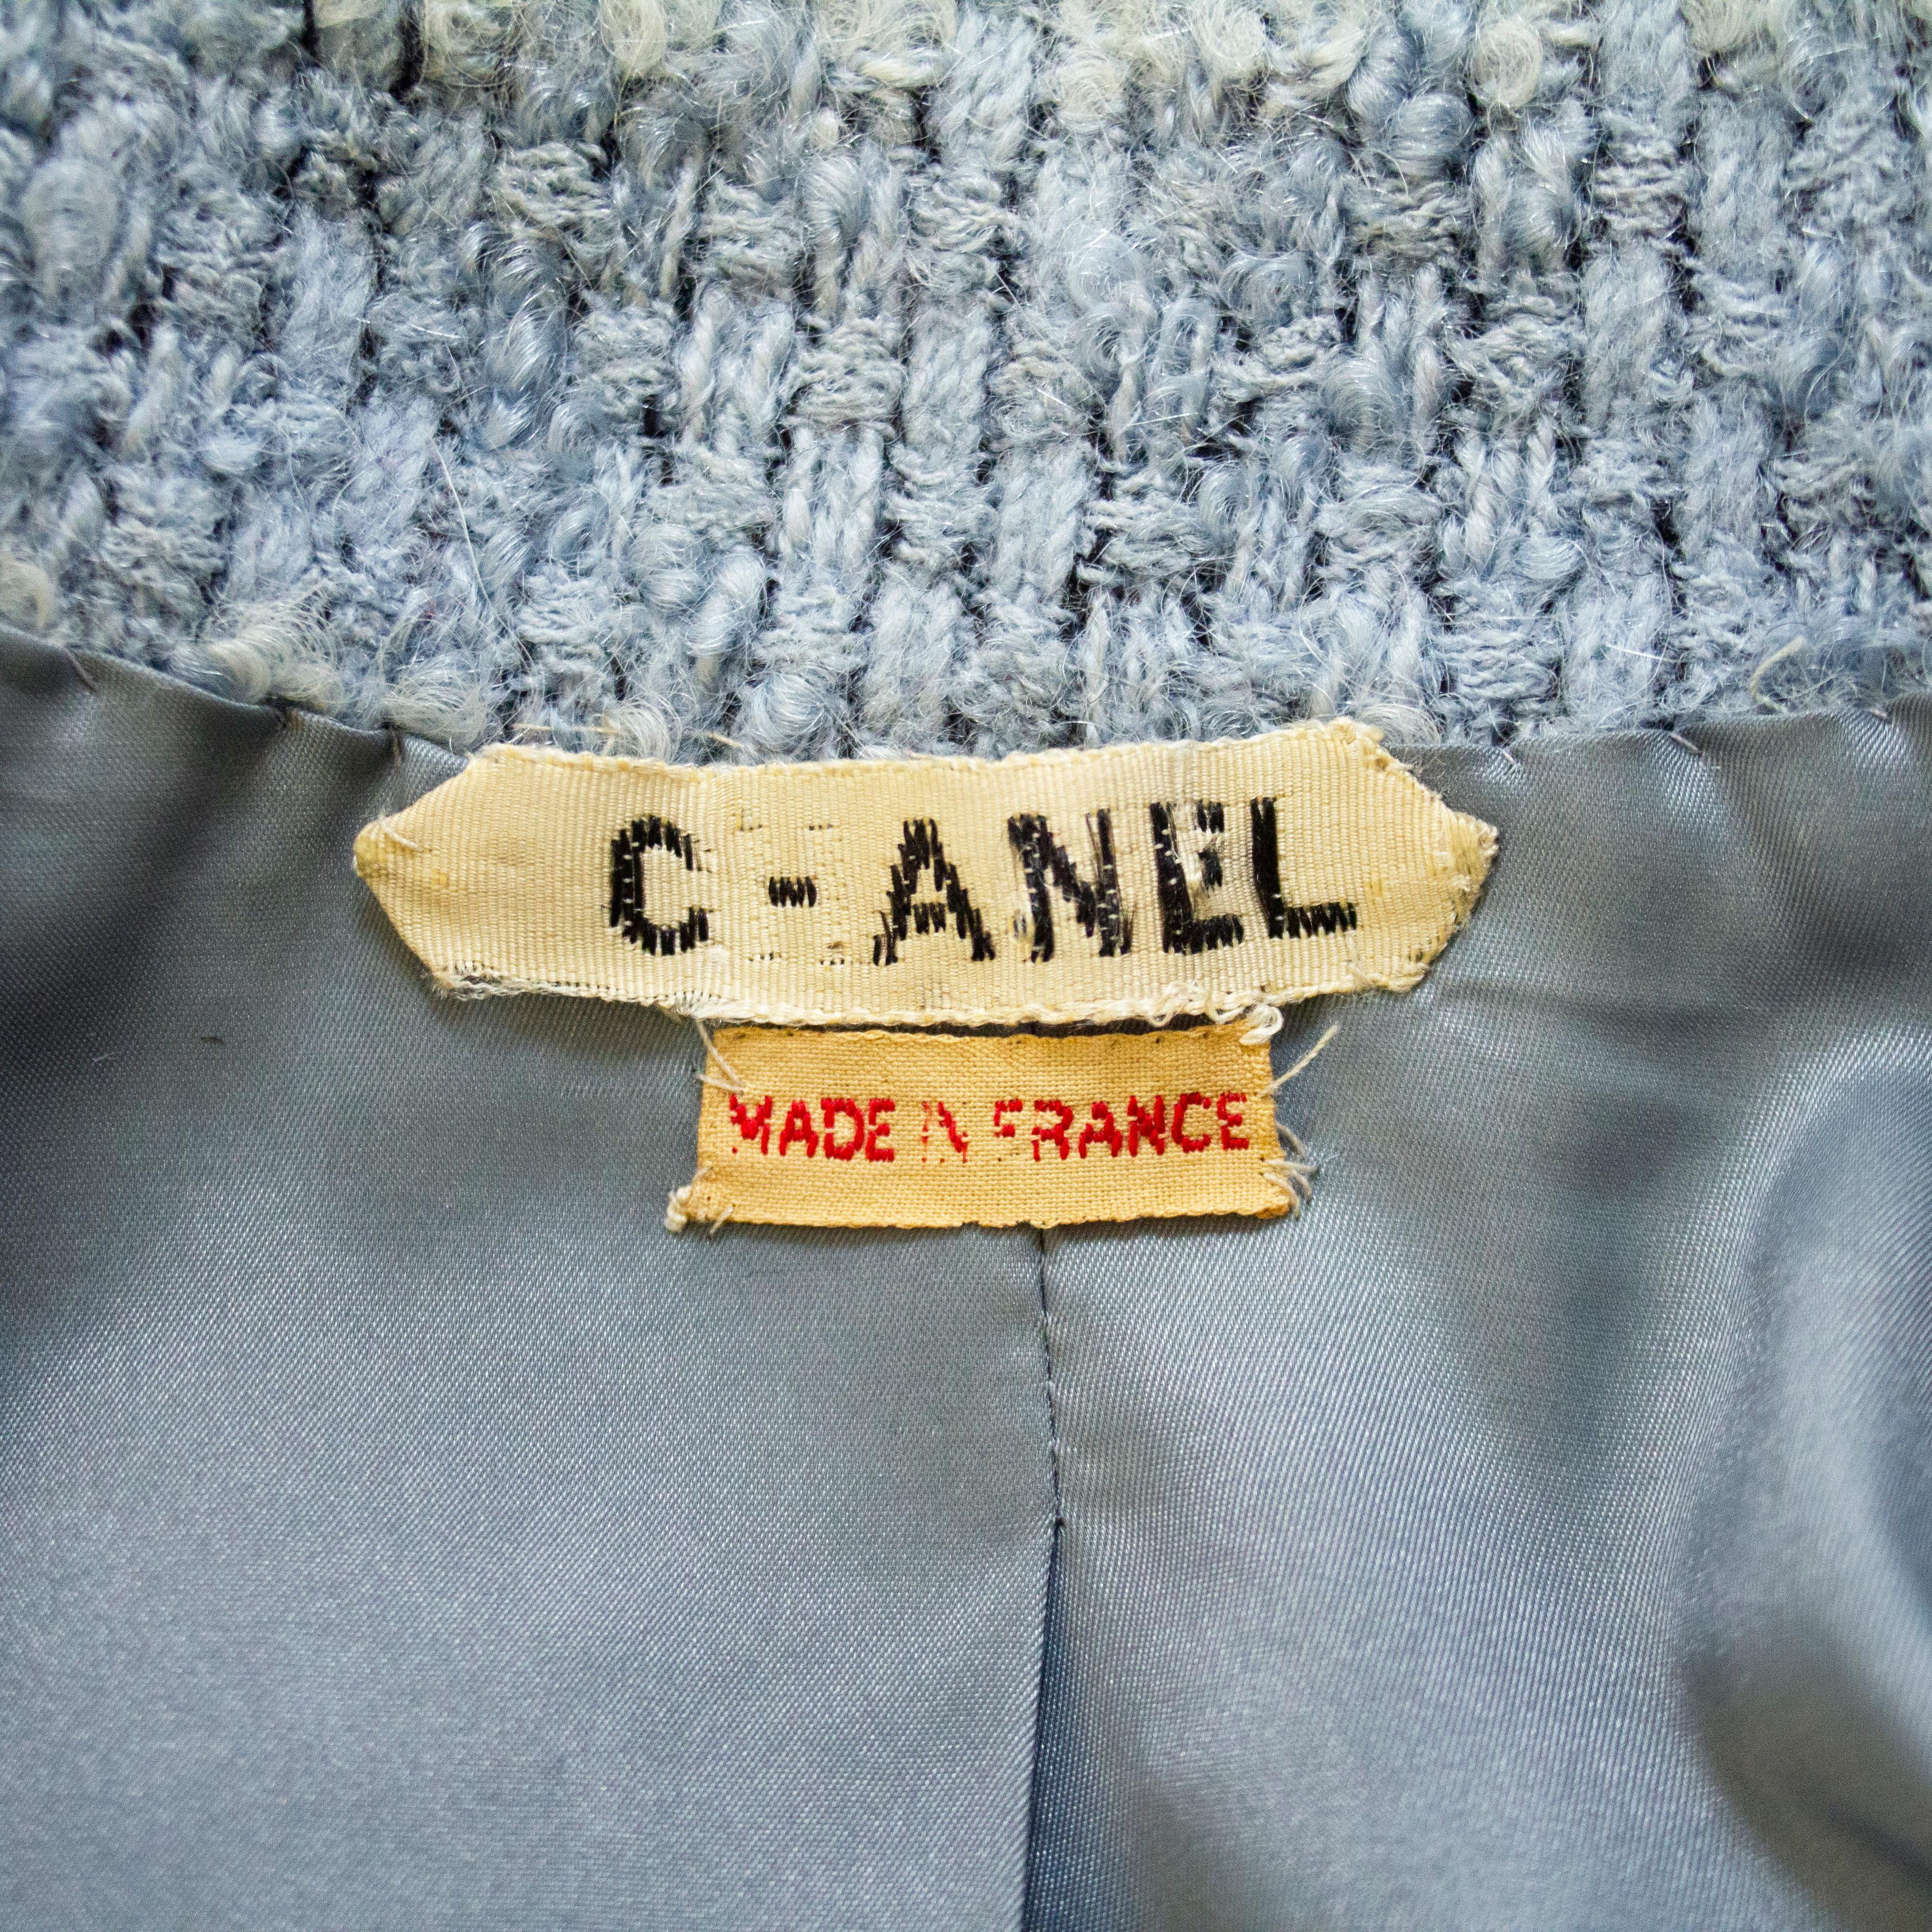 Chanel Haute Couture Blue Tweed Skirt Suit In Good Condition In Toronto, Ontario